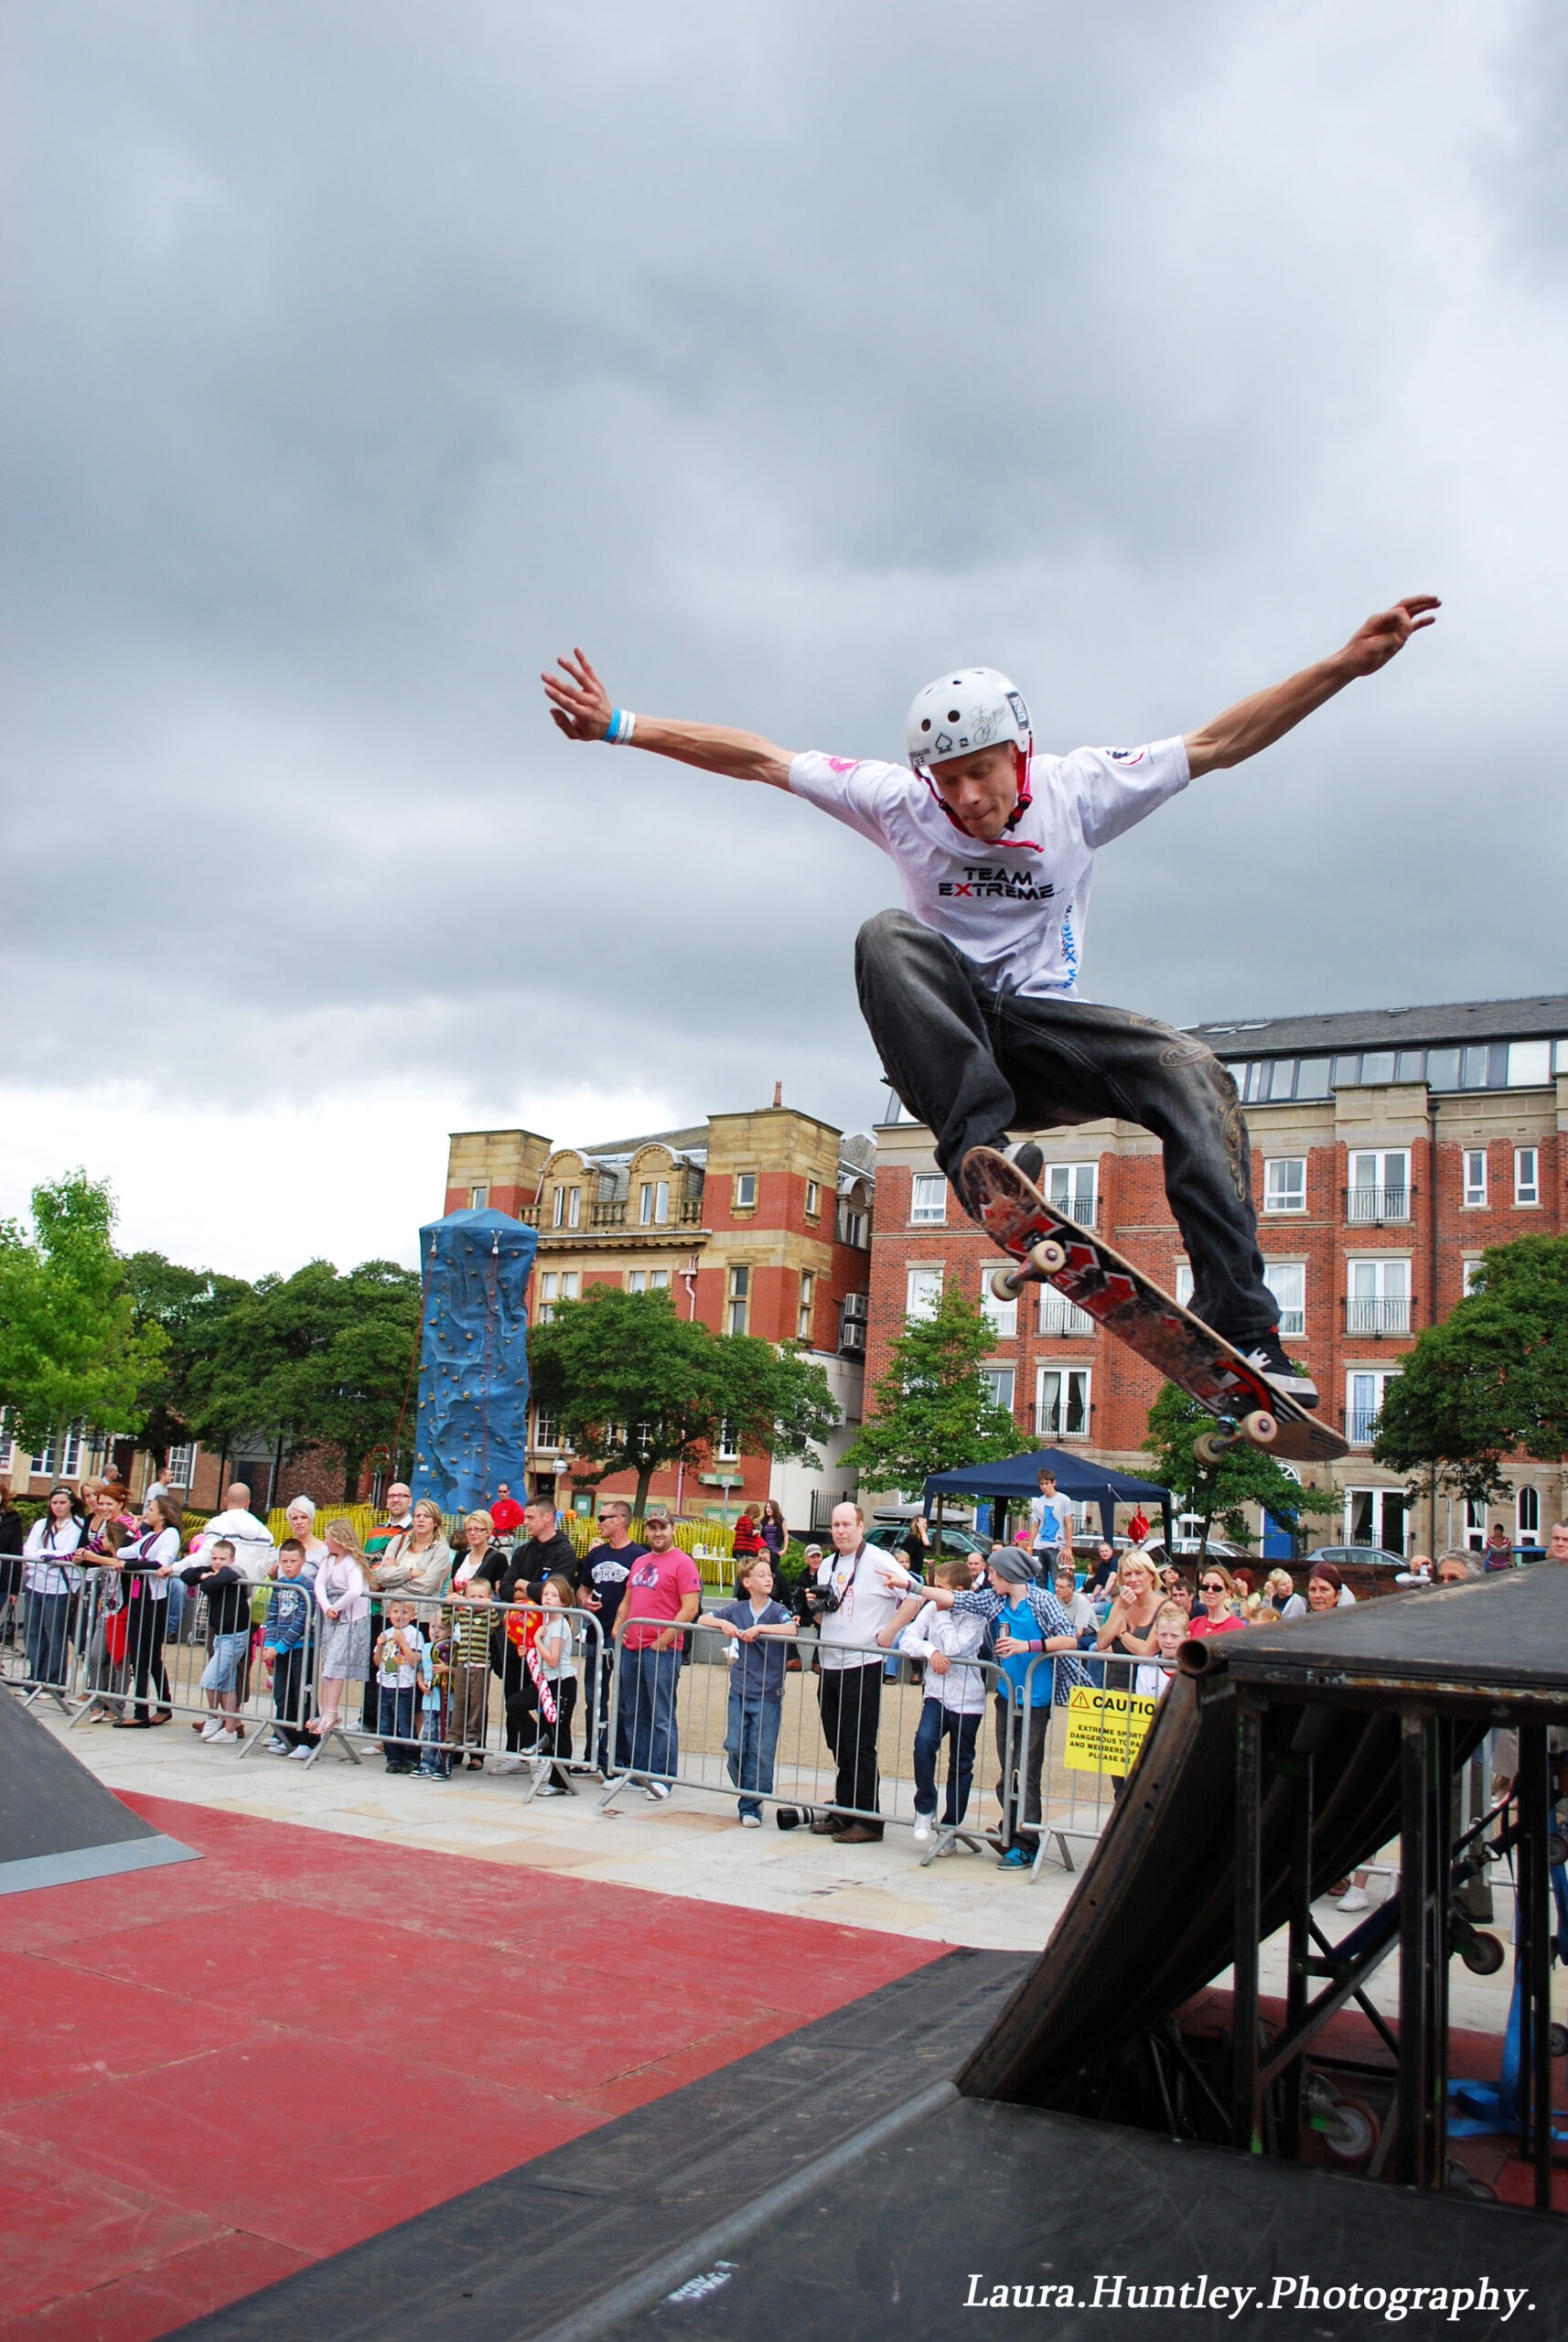 Skateboard stunt show SPECIALISTS for events in Middle East